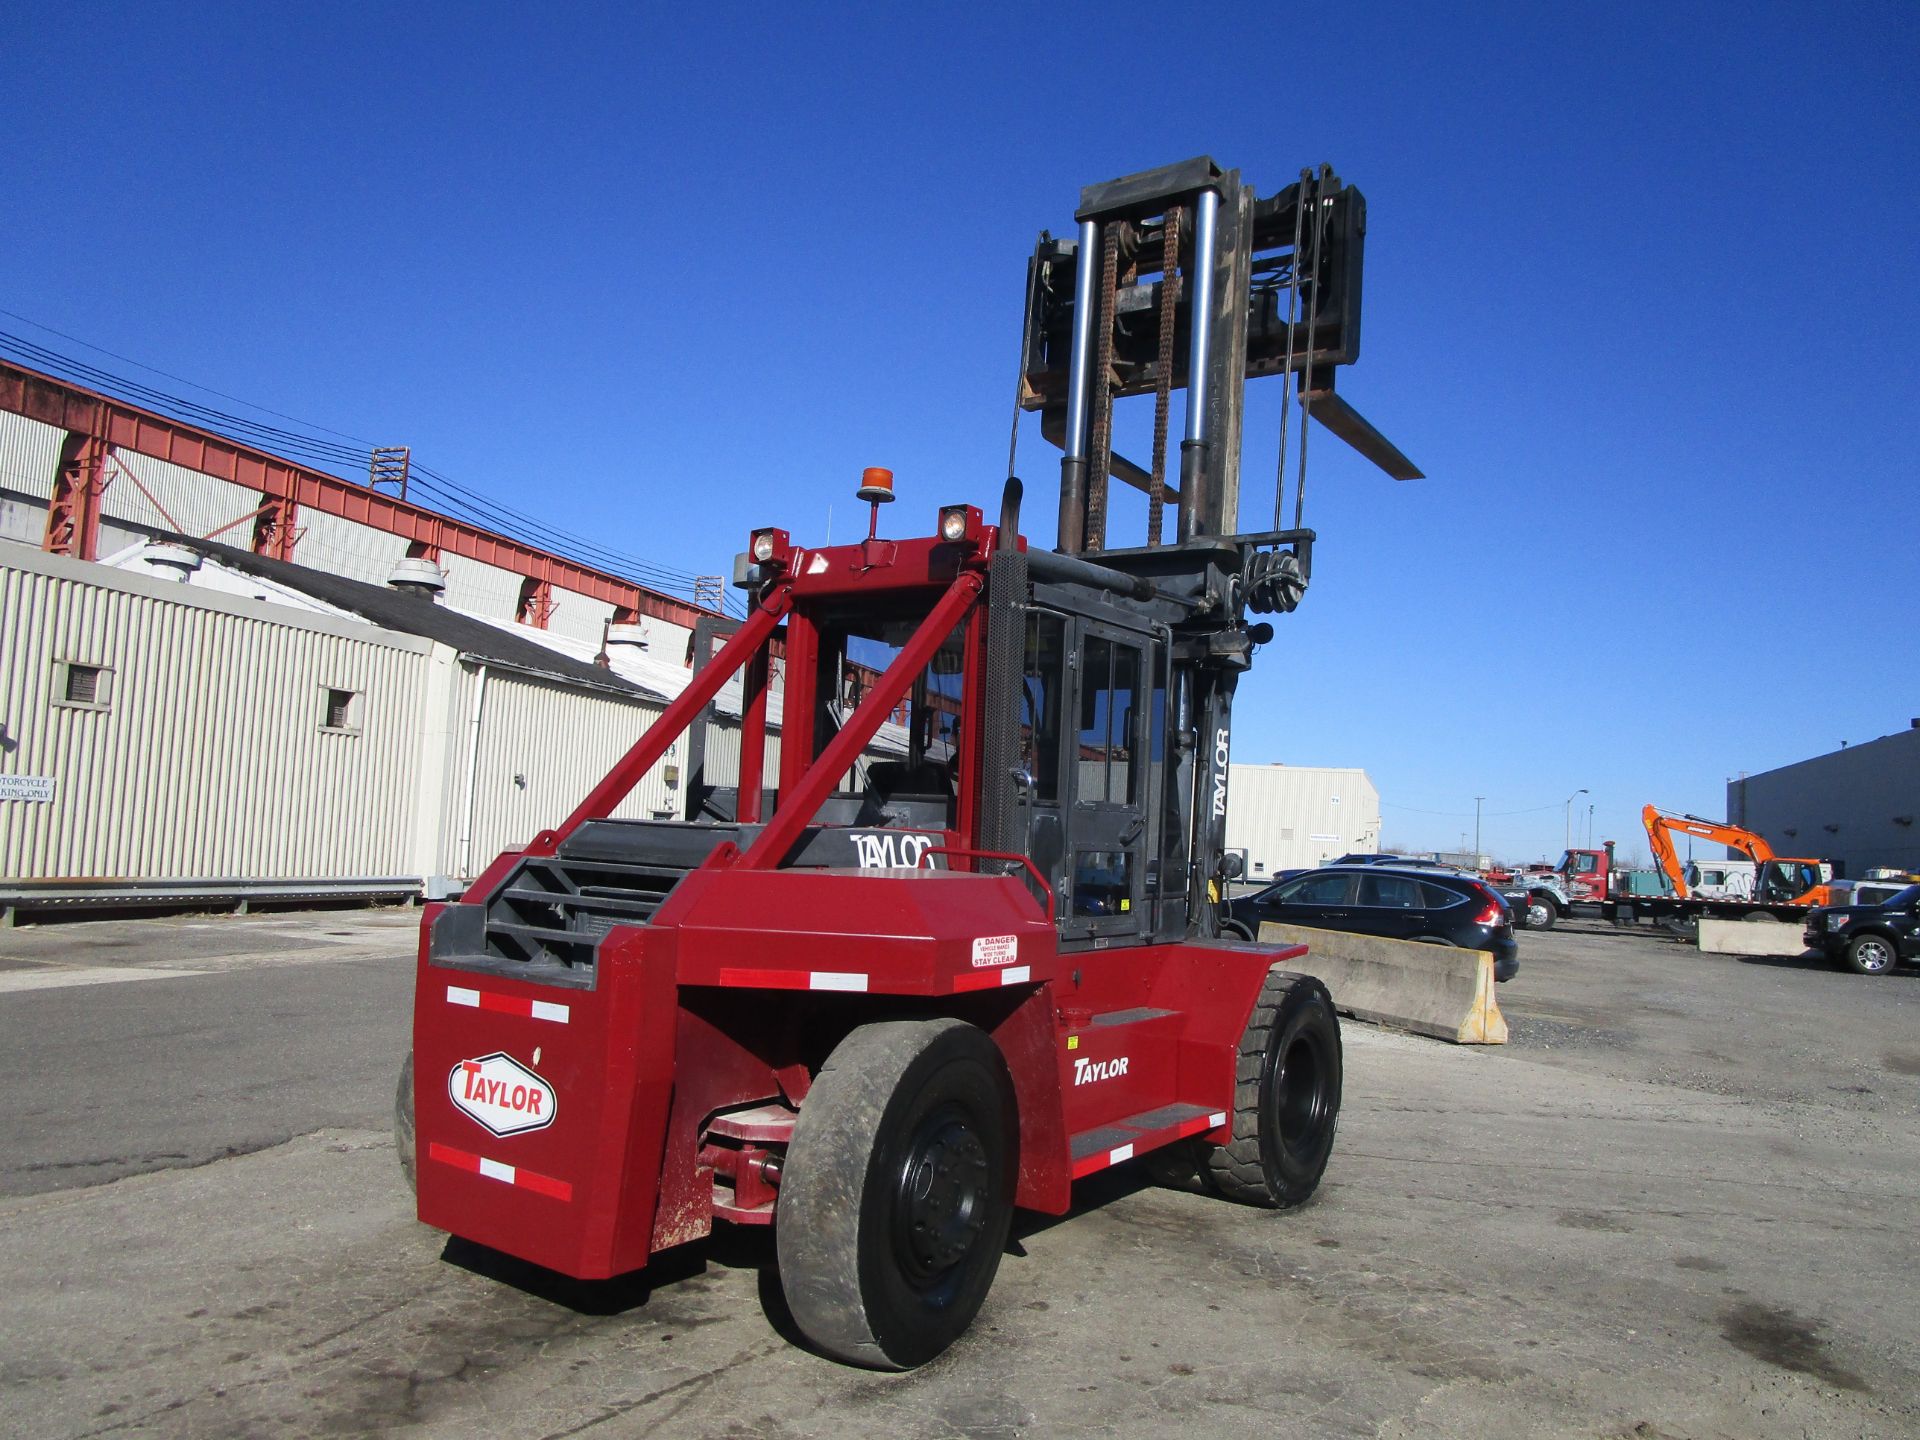 Taylor THD-300S 30,000lb Forklift - Image 13 of 20